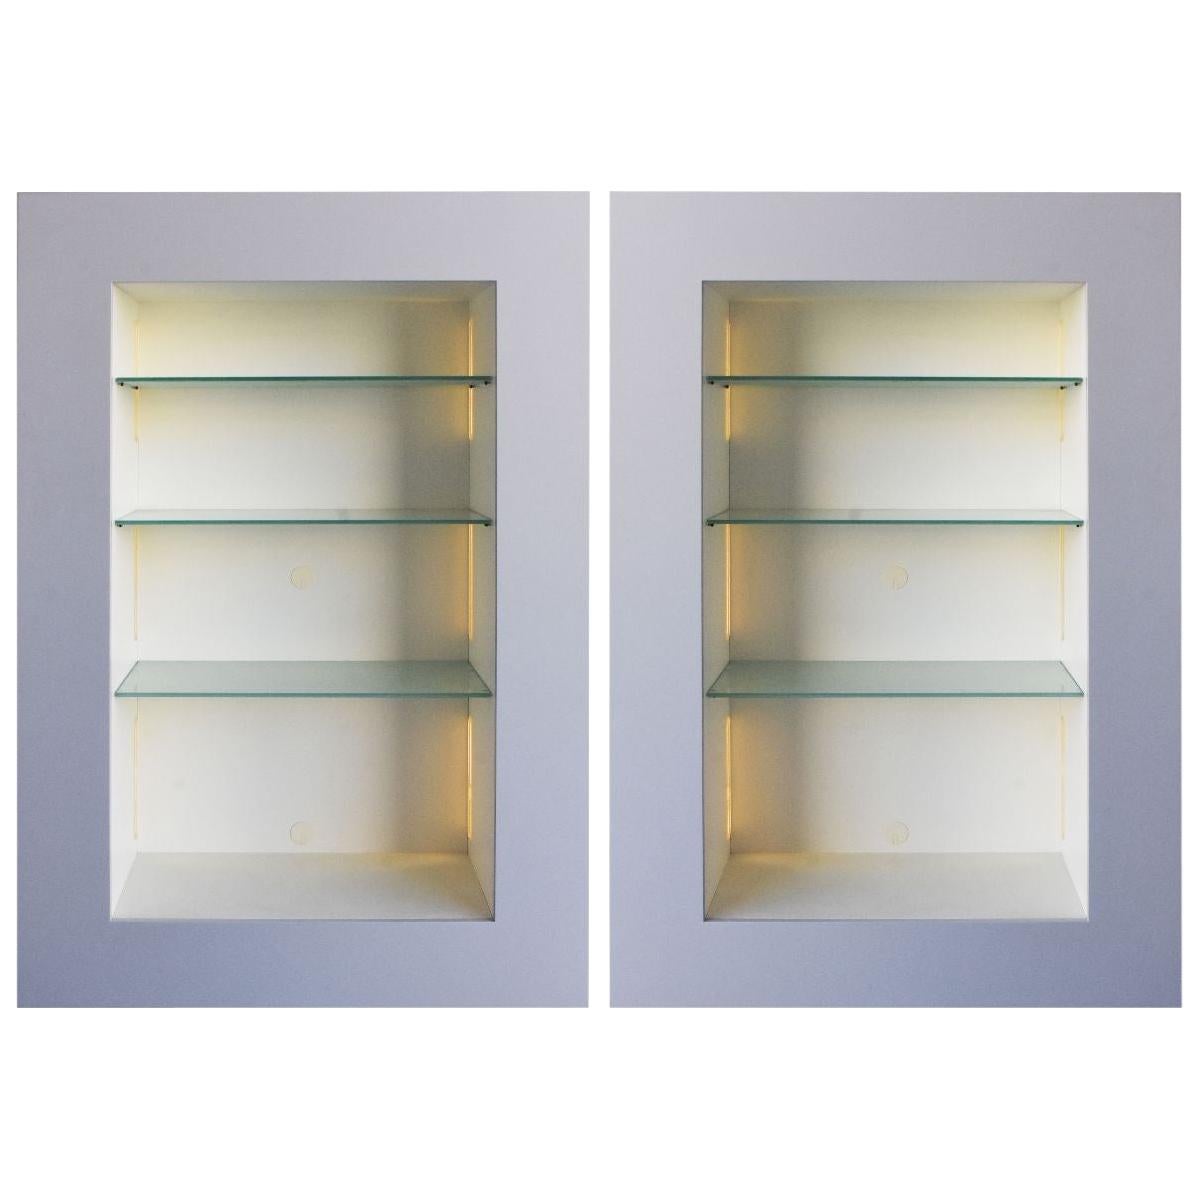 Pair of Contemporary Illuminated Display Cases in Lacquered Wood, Acerbis